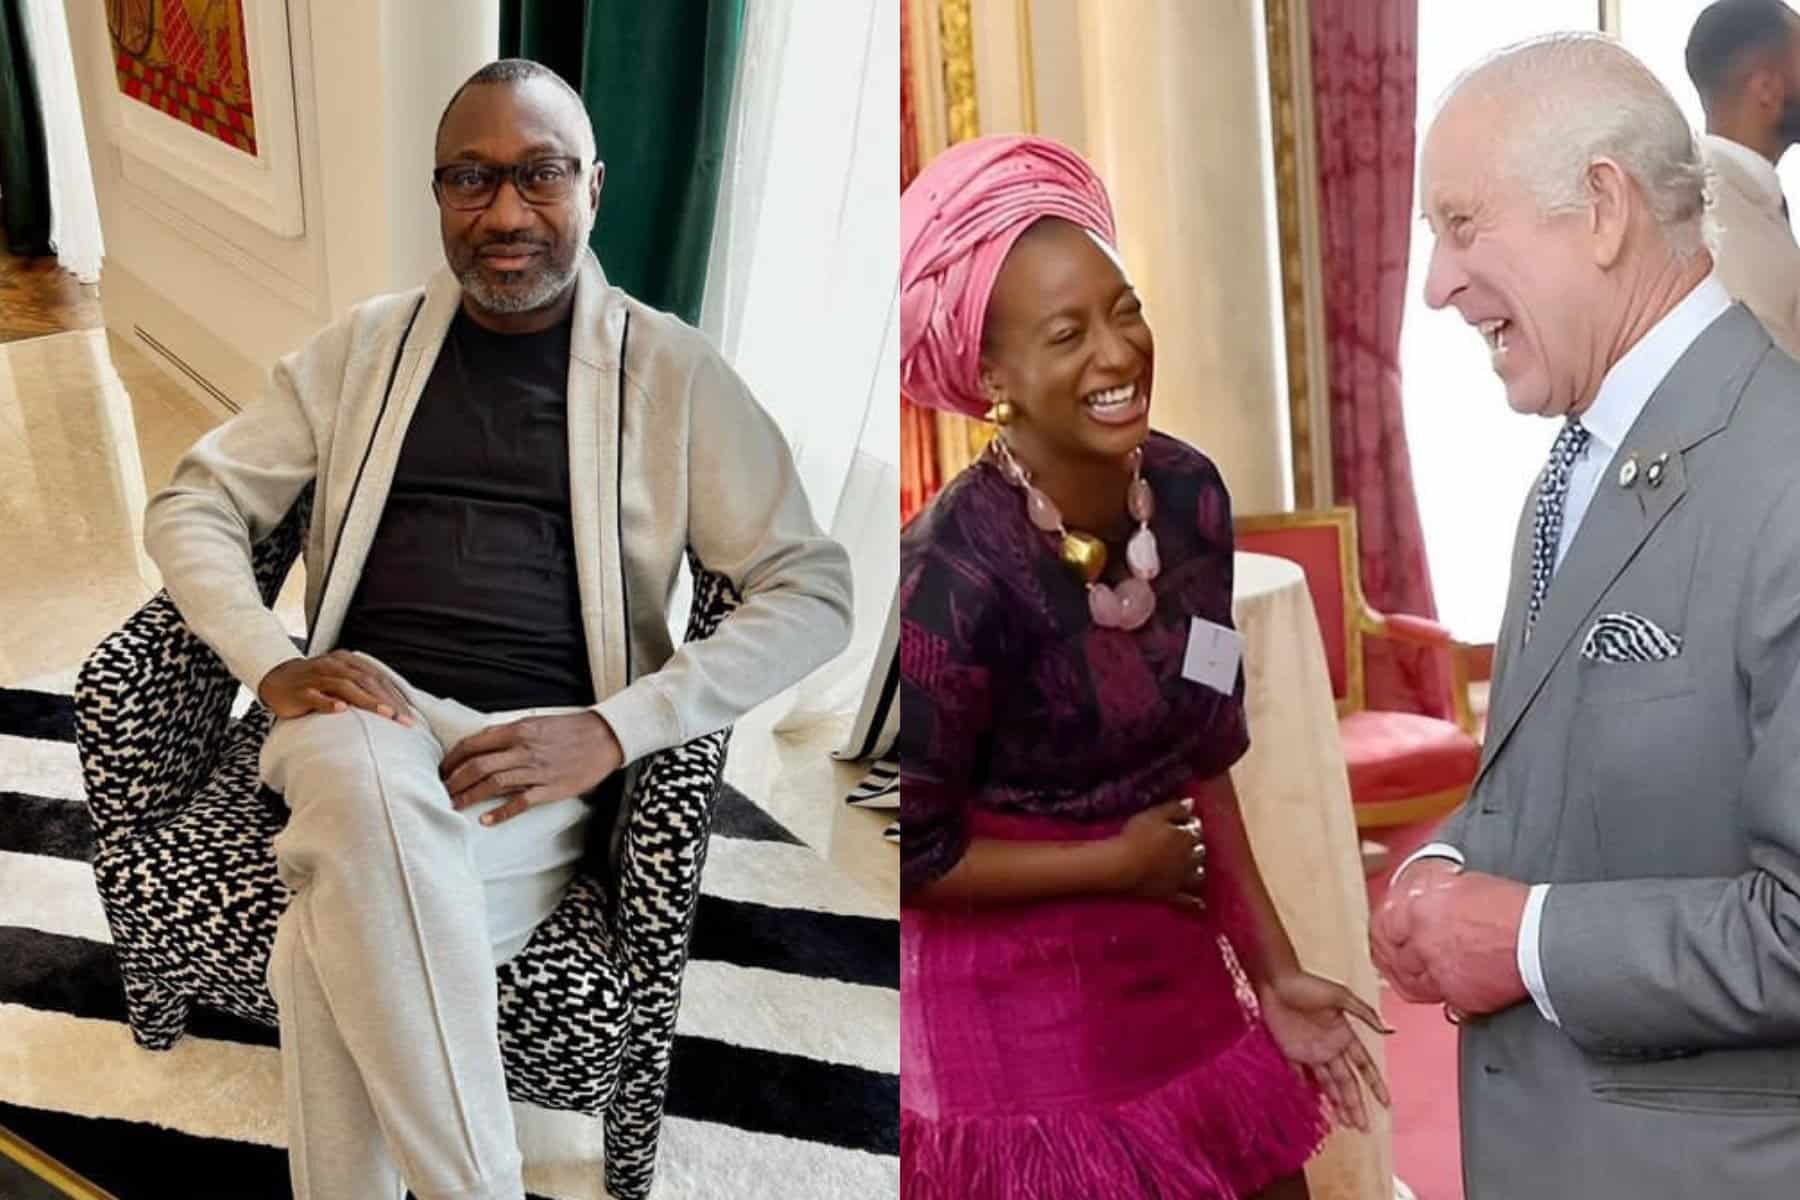 Femi Otedola praises daughter as she meets with King Charles